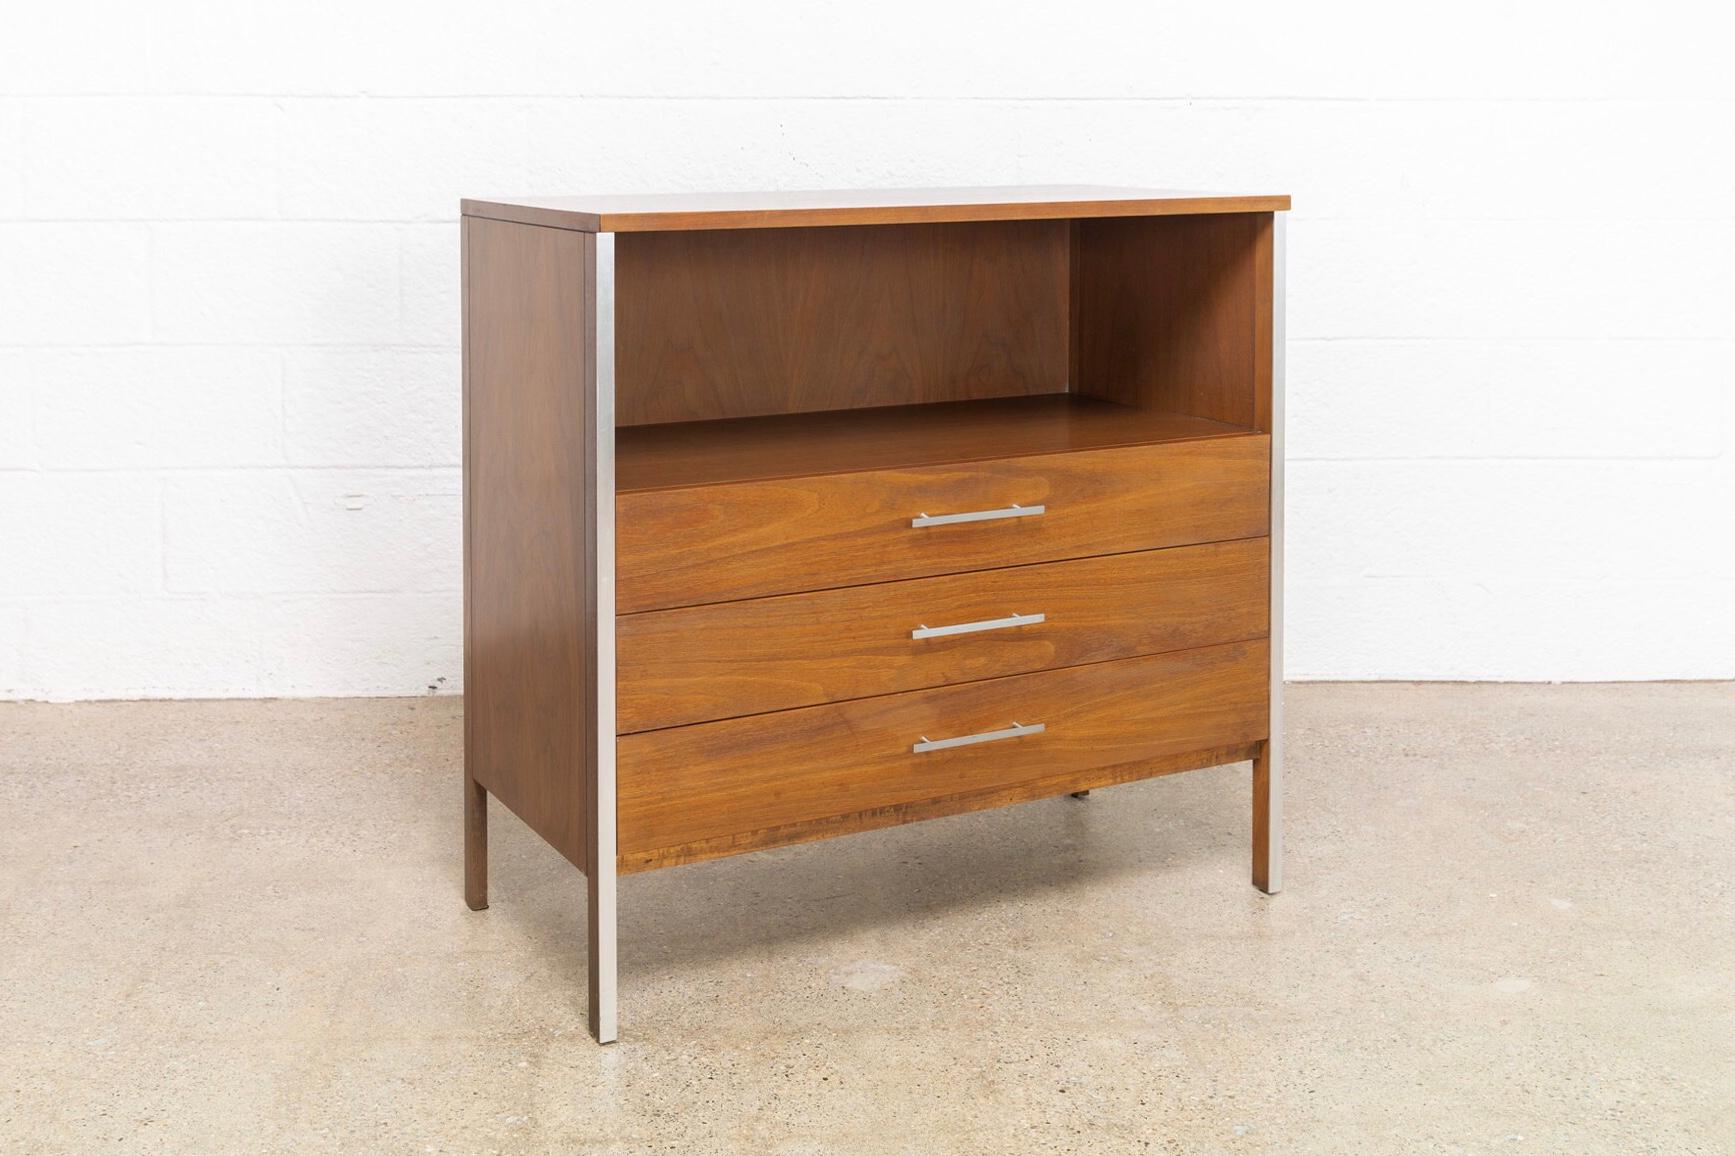 This vintage Mid-Century Modern Paul McCobb walnut chest of drawers was produced by Calvin Furniture circa 1950 as part of the Linear Group line. Expertly crafted from walnut, this Classic piece features sleek, geometric lines with signature Paul